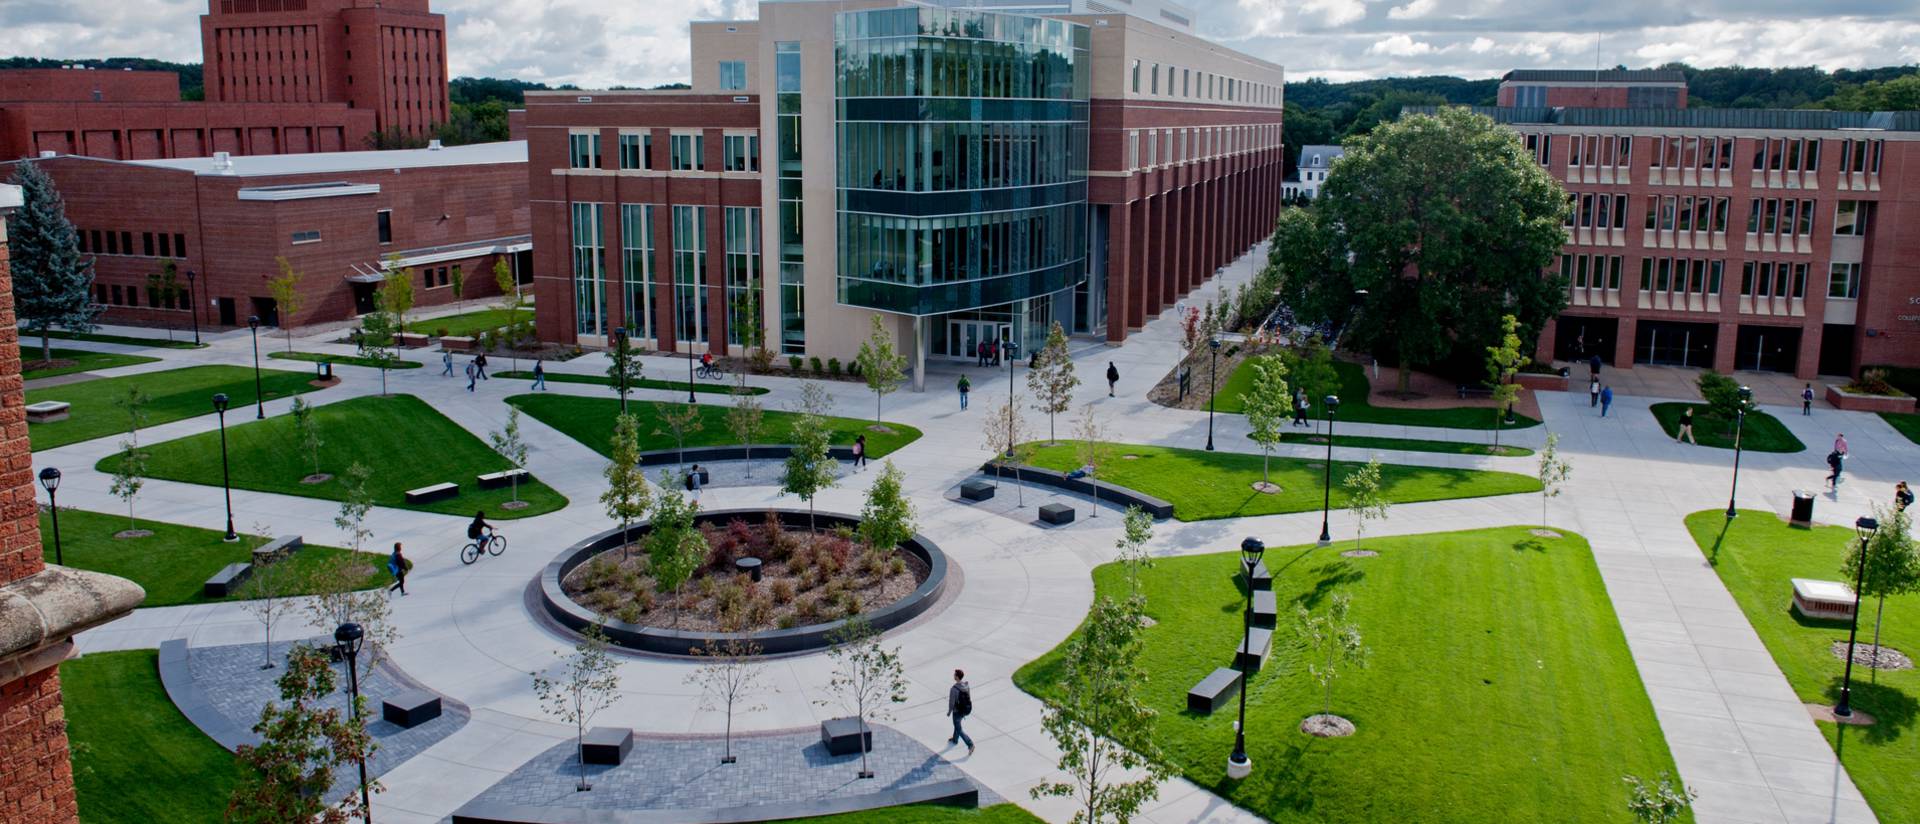 UW-Eau Claire campus mall and Centennial Hall